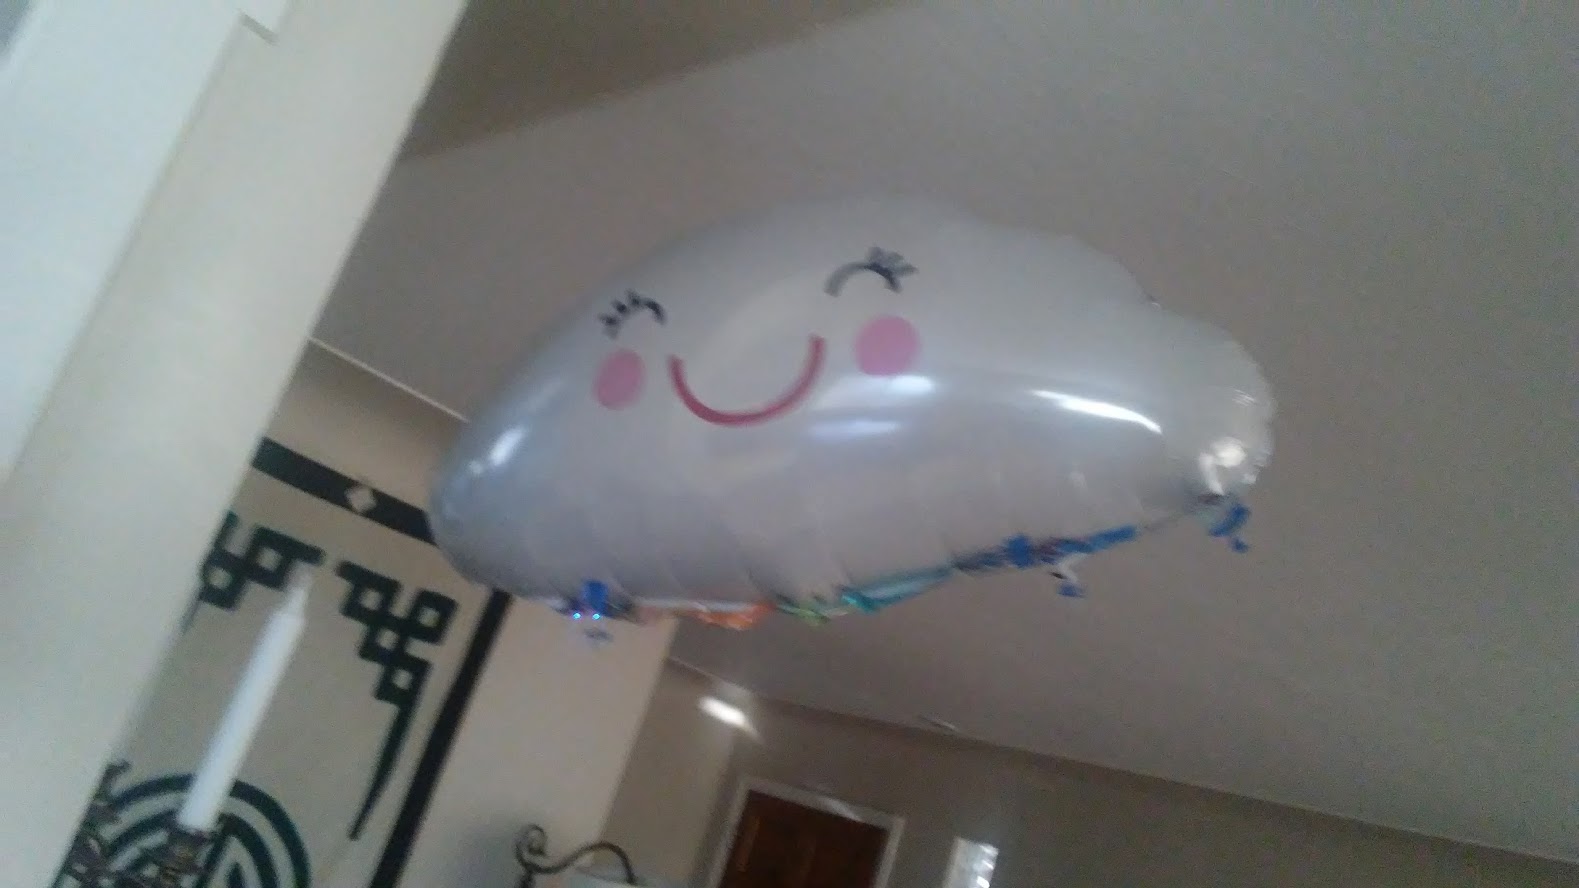 another view of the blimp